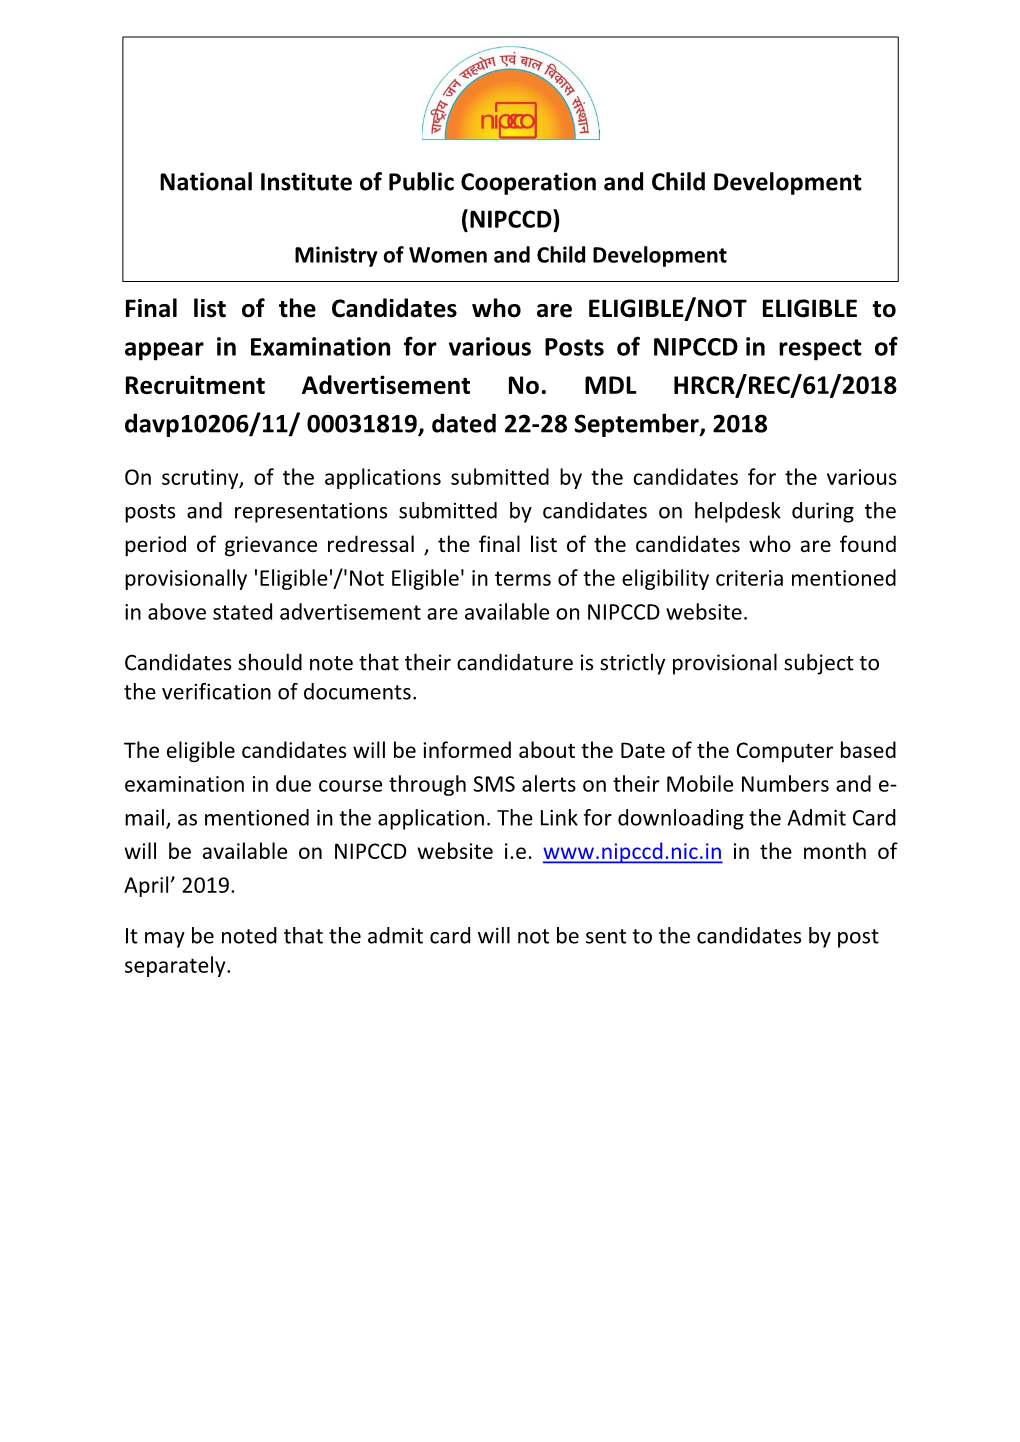 Final List of the Candidates Who Are ELIGIBLE/NOT ELIGIBLE to Appear in Examination for Various Posts of NIPCCD in Respect of Recruitment Advertisement No